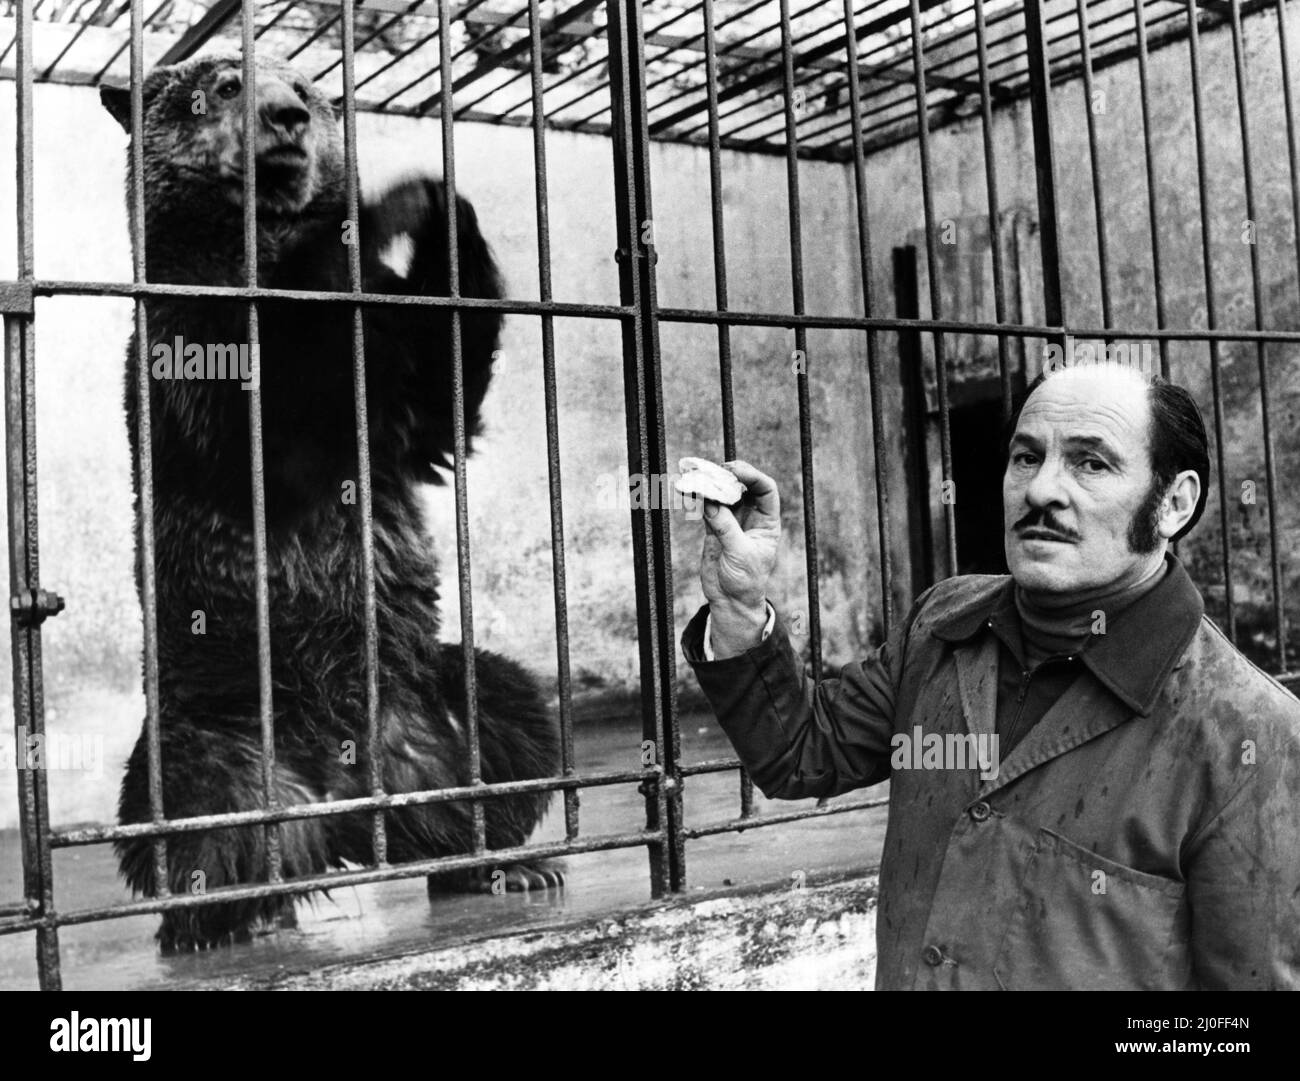 The Cardiff Zoo, Barry, which is owned by the Palmer brothers is up for sale. Pictured is Mr Hugh Palmer about to offer a piece of bread to the Zoo's brown bear. 23rd January 1980. Stock Photo